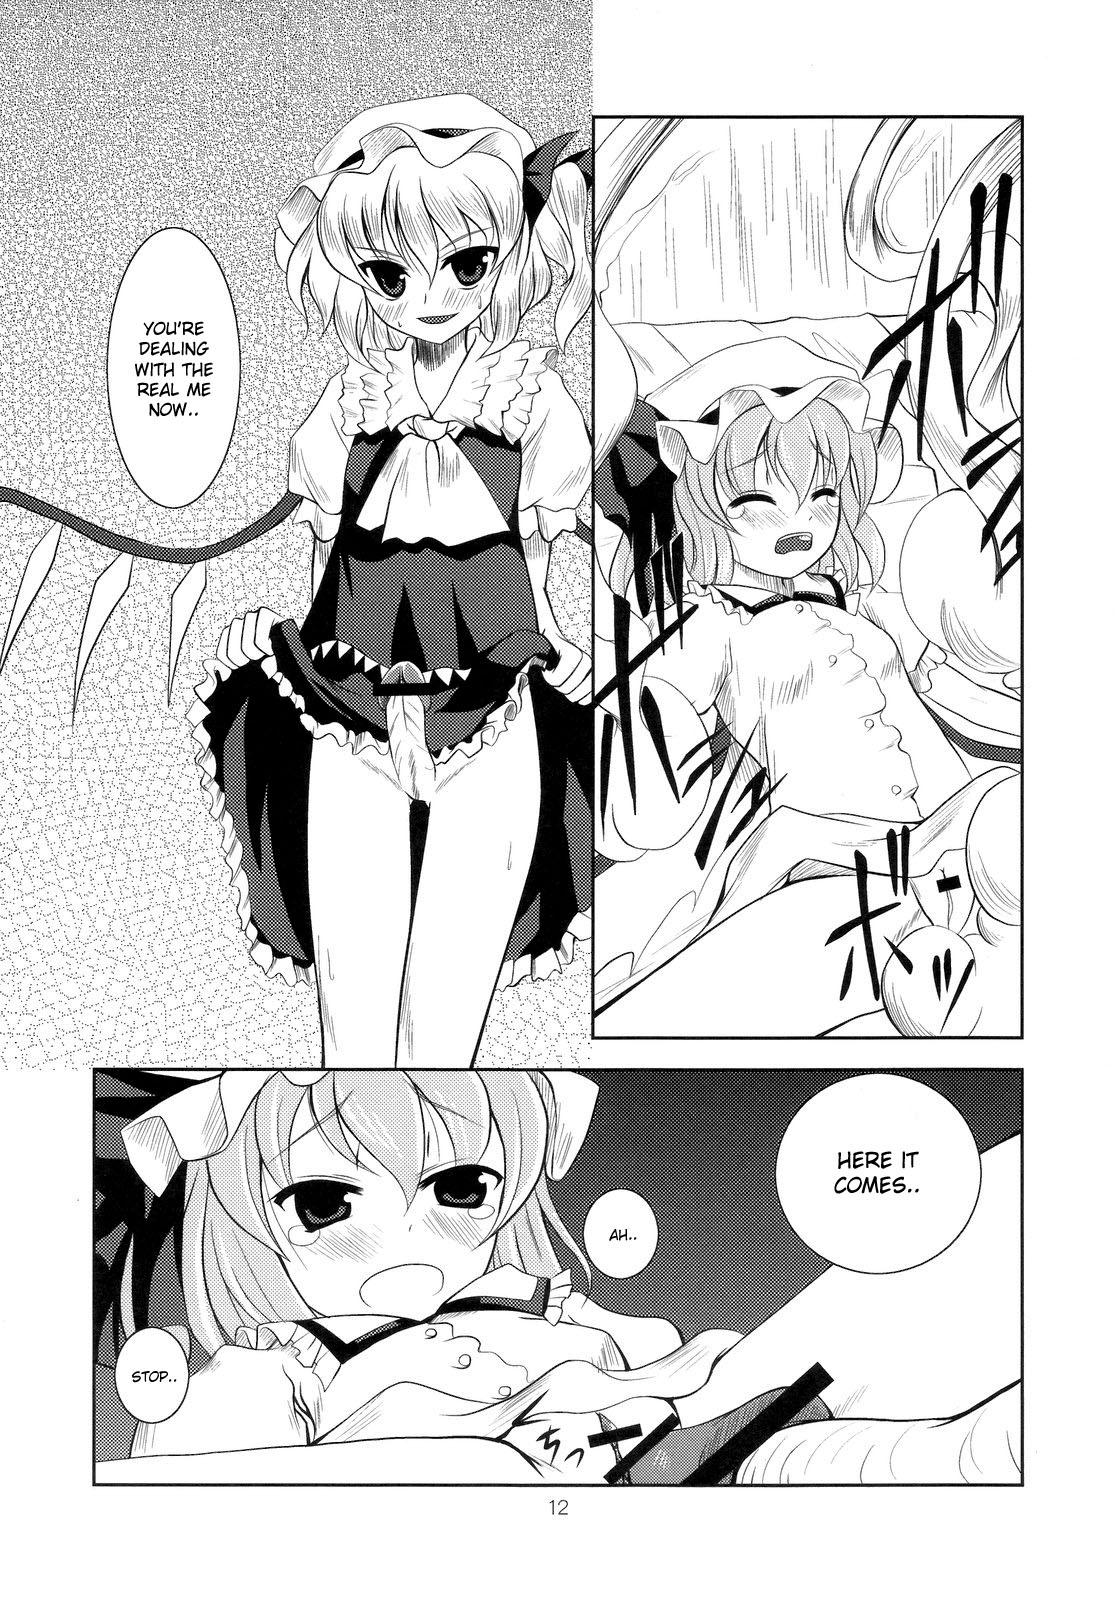 Weird Scarlet x Scarlet - Touhou project Adult - Page 11